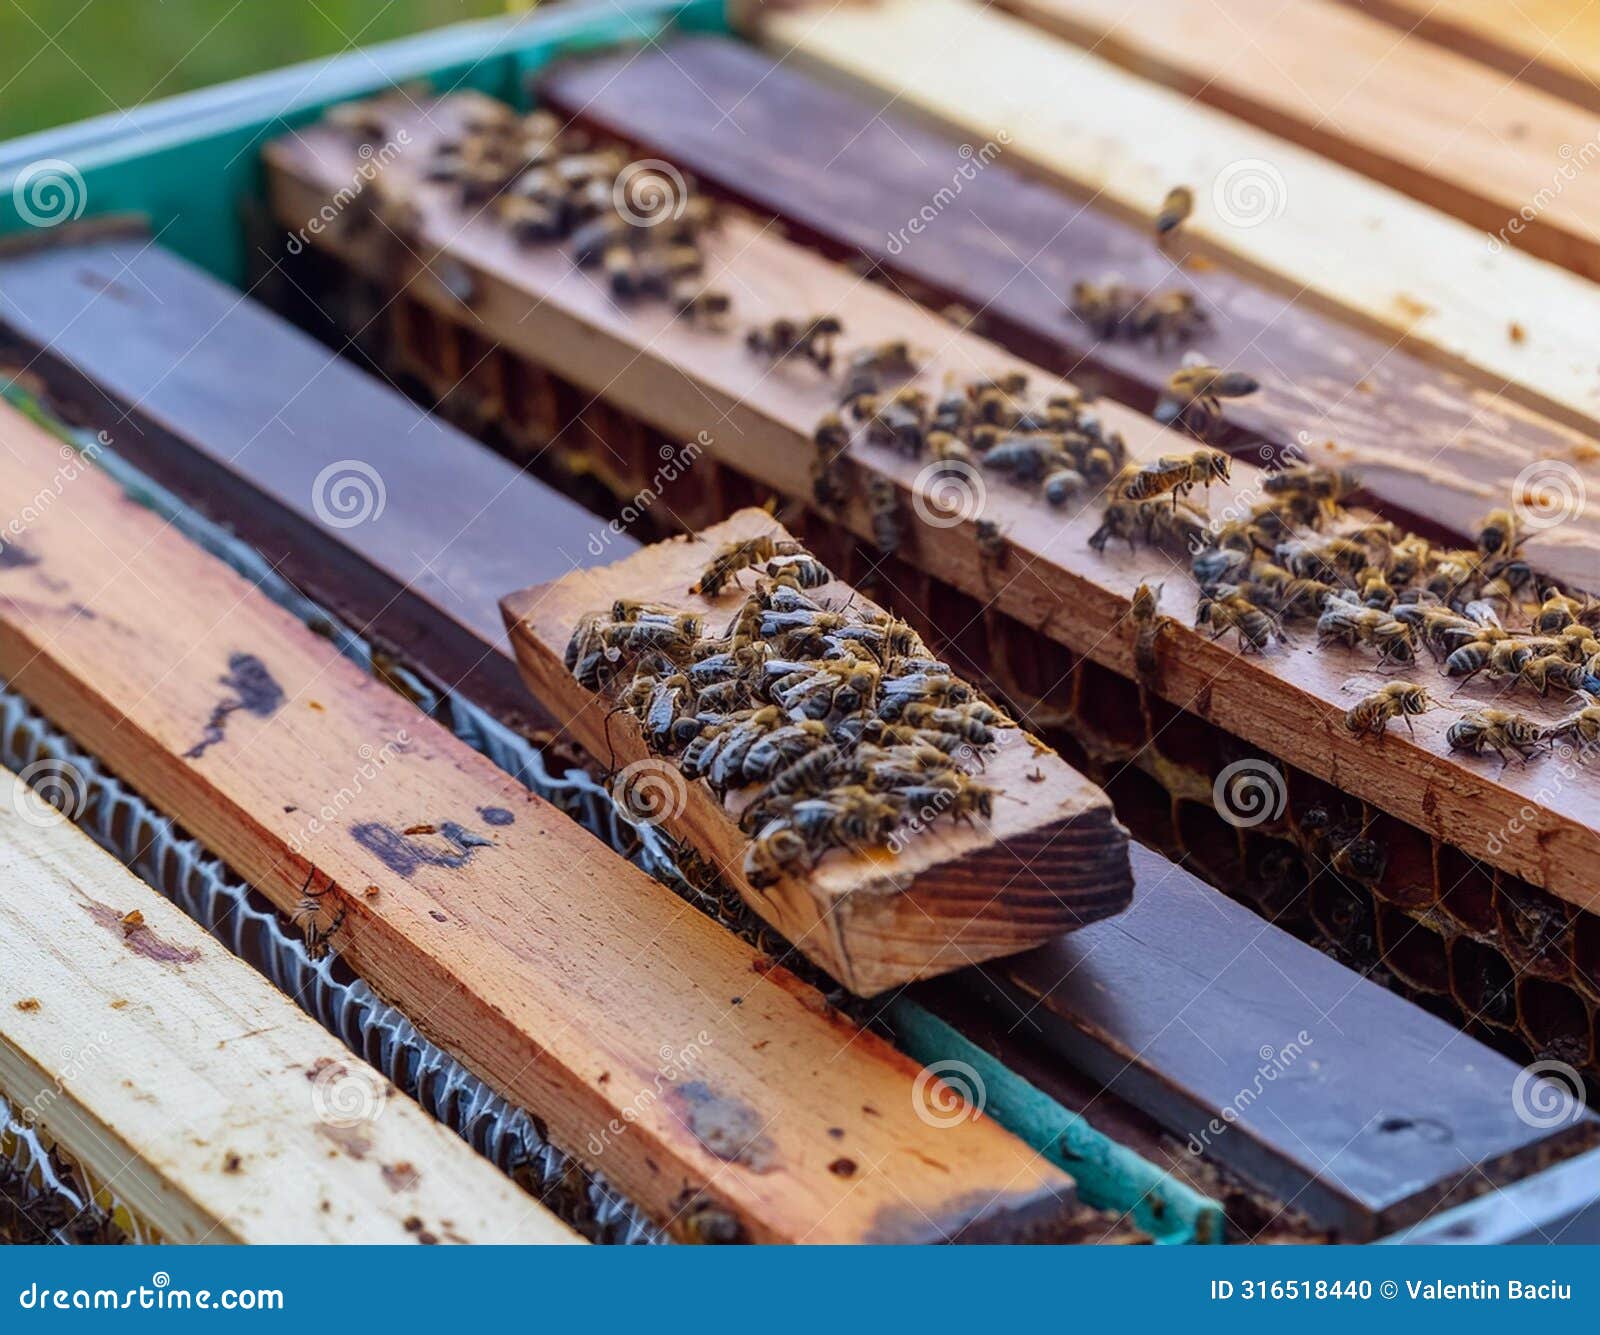 busy bees: industrious activity inside a beehive